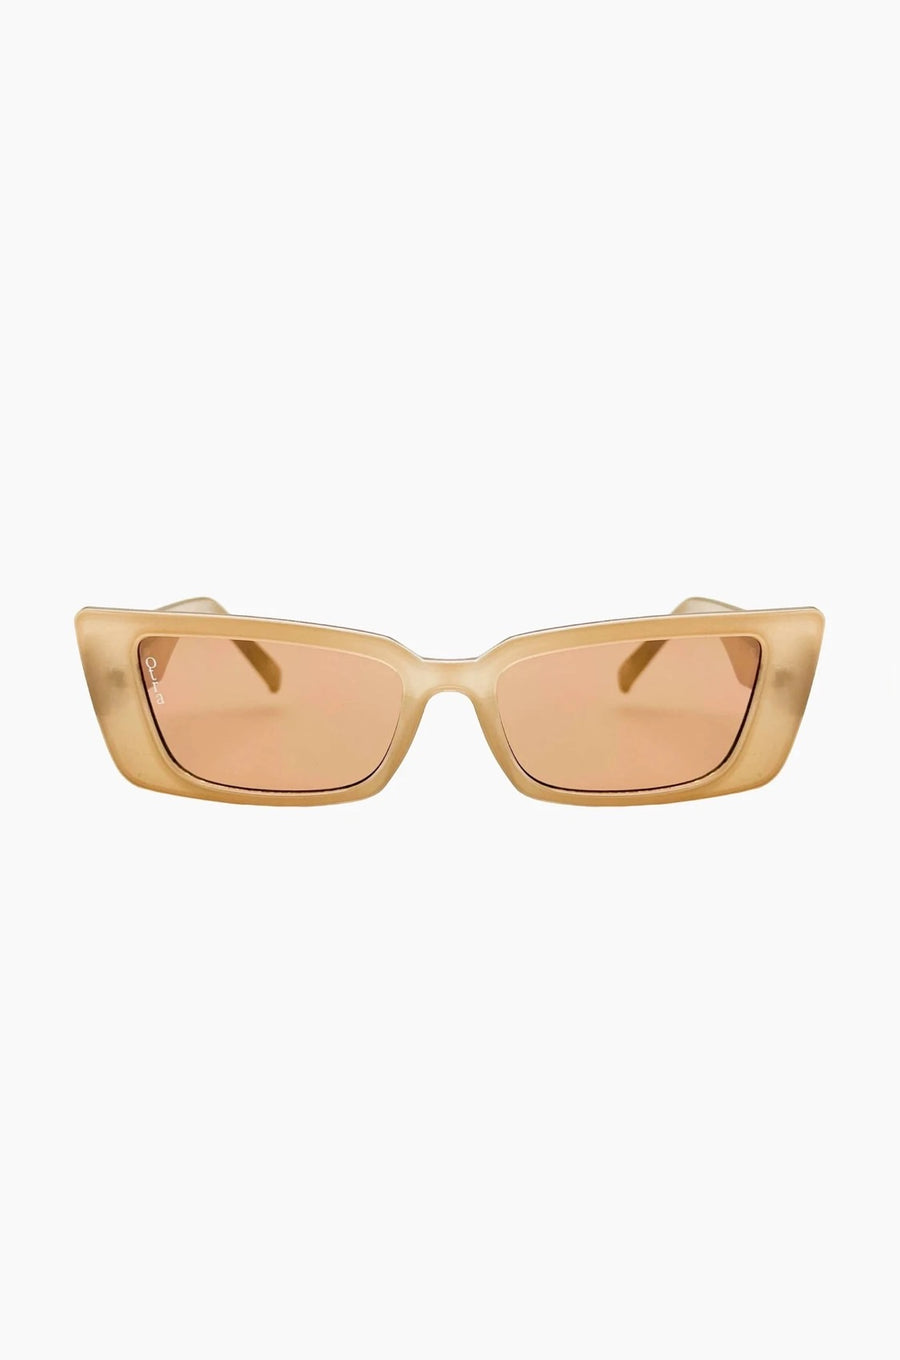 Evie Sunglasses (Nude) by Otra